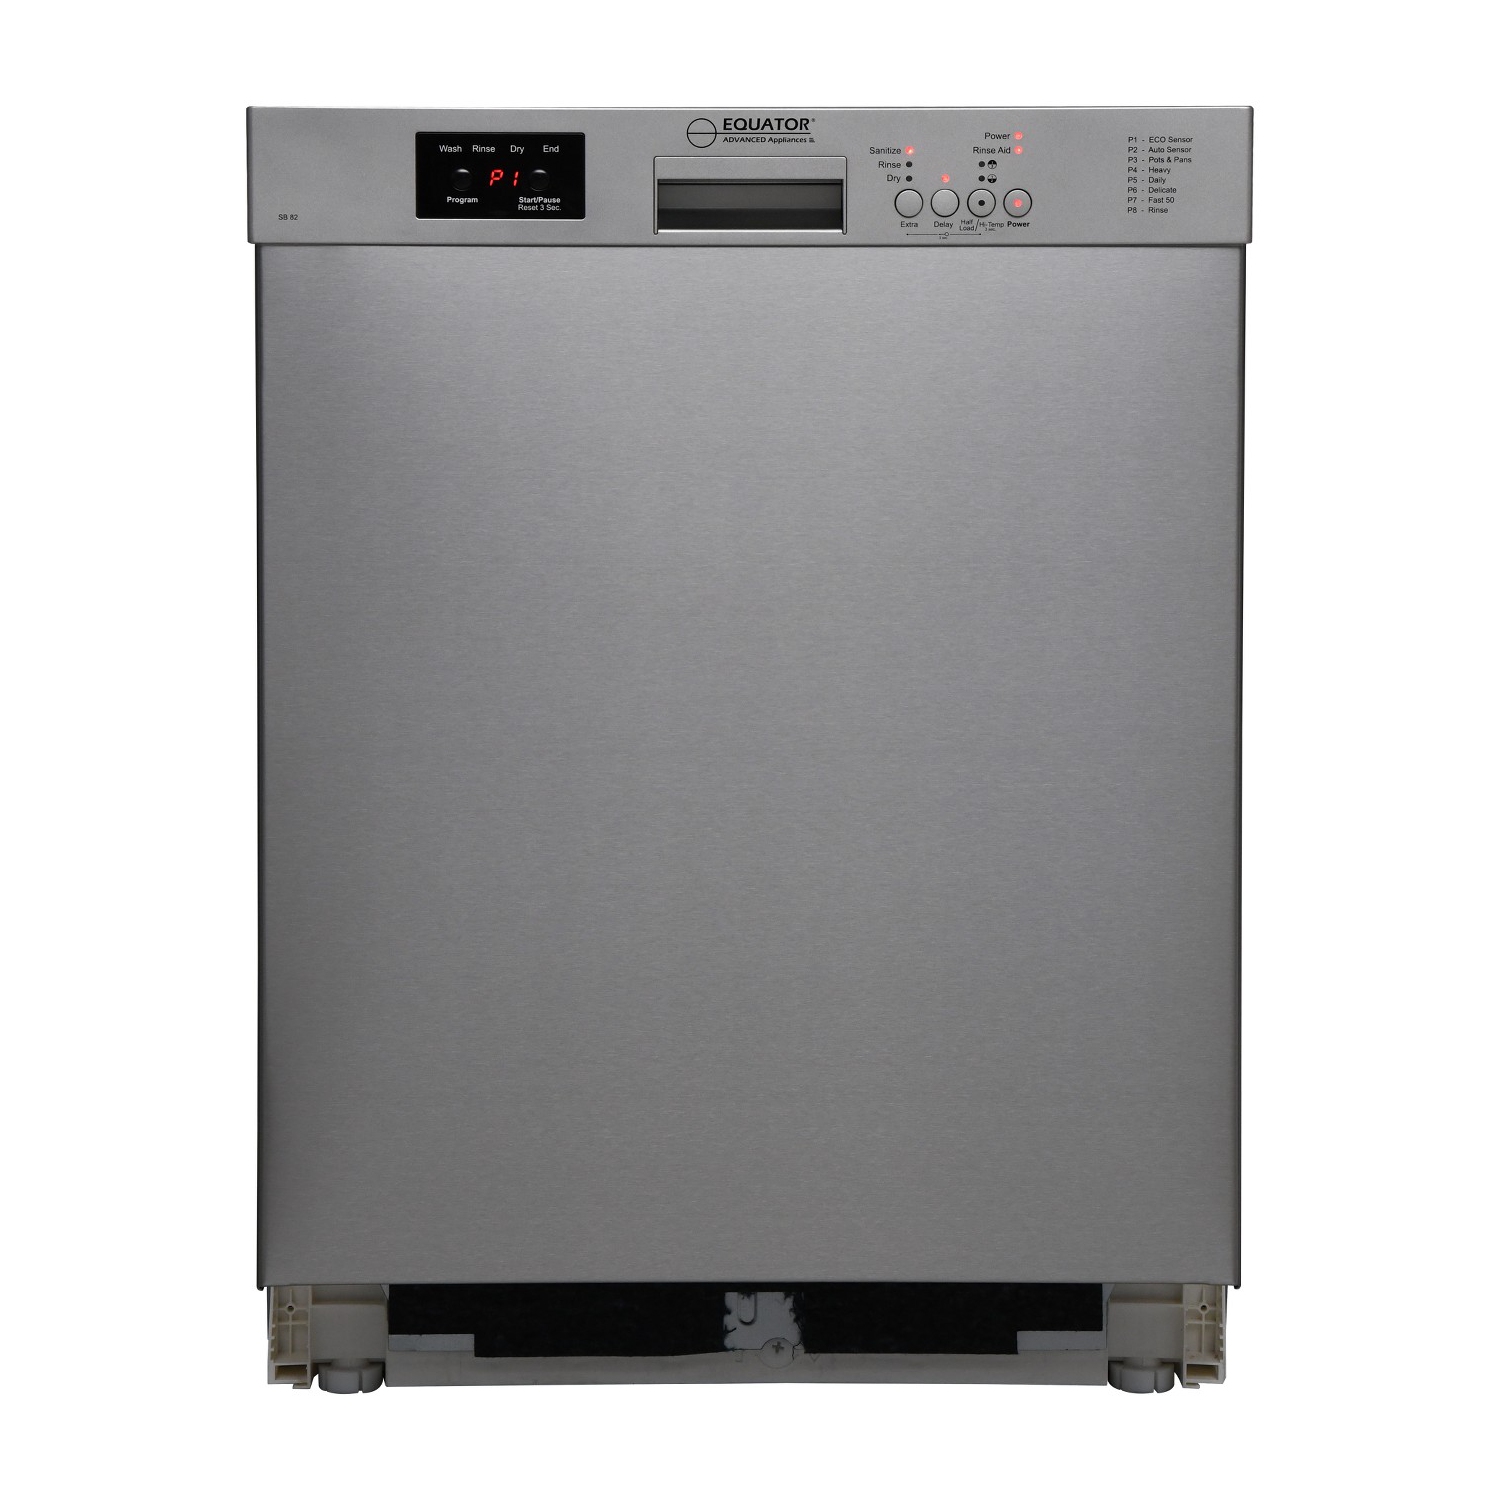 Equator Europe - 24" Built in 14 place Dishwasher in White/Black/Stainless ( SB 82 )